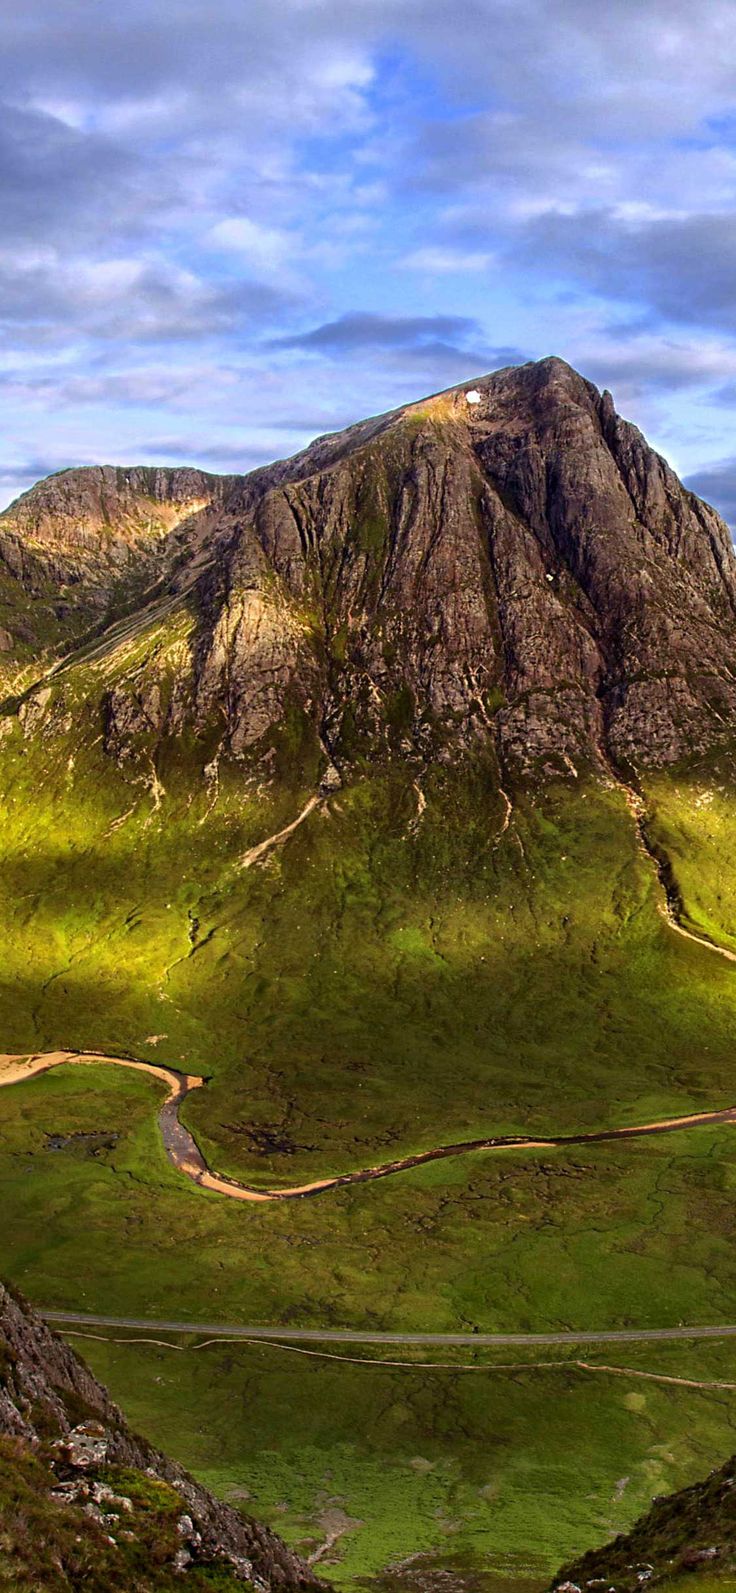 iPhone Pro Wallpaper Dawn highlands scotland aerial photography mountains wallpaper HD. Mountain wallpaper, Aerial photography, iPhone wallpaper landscape